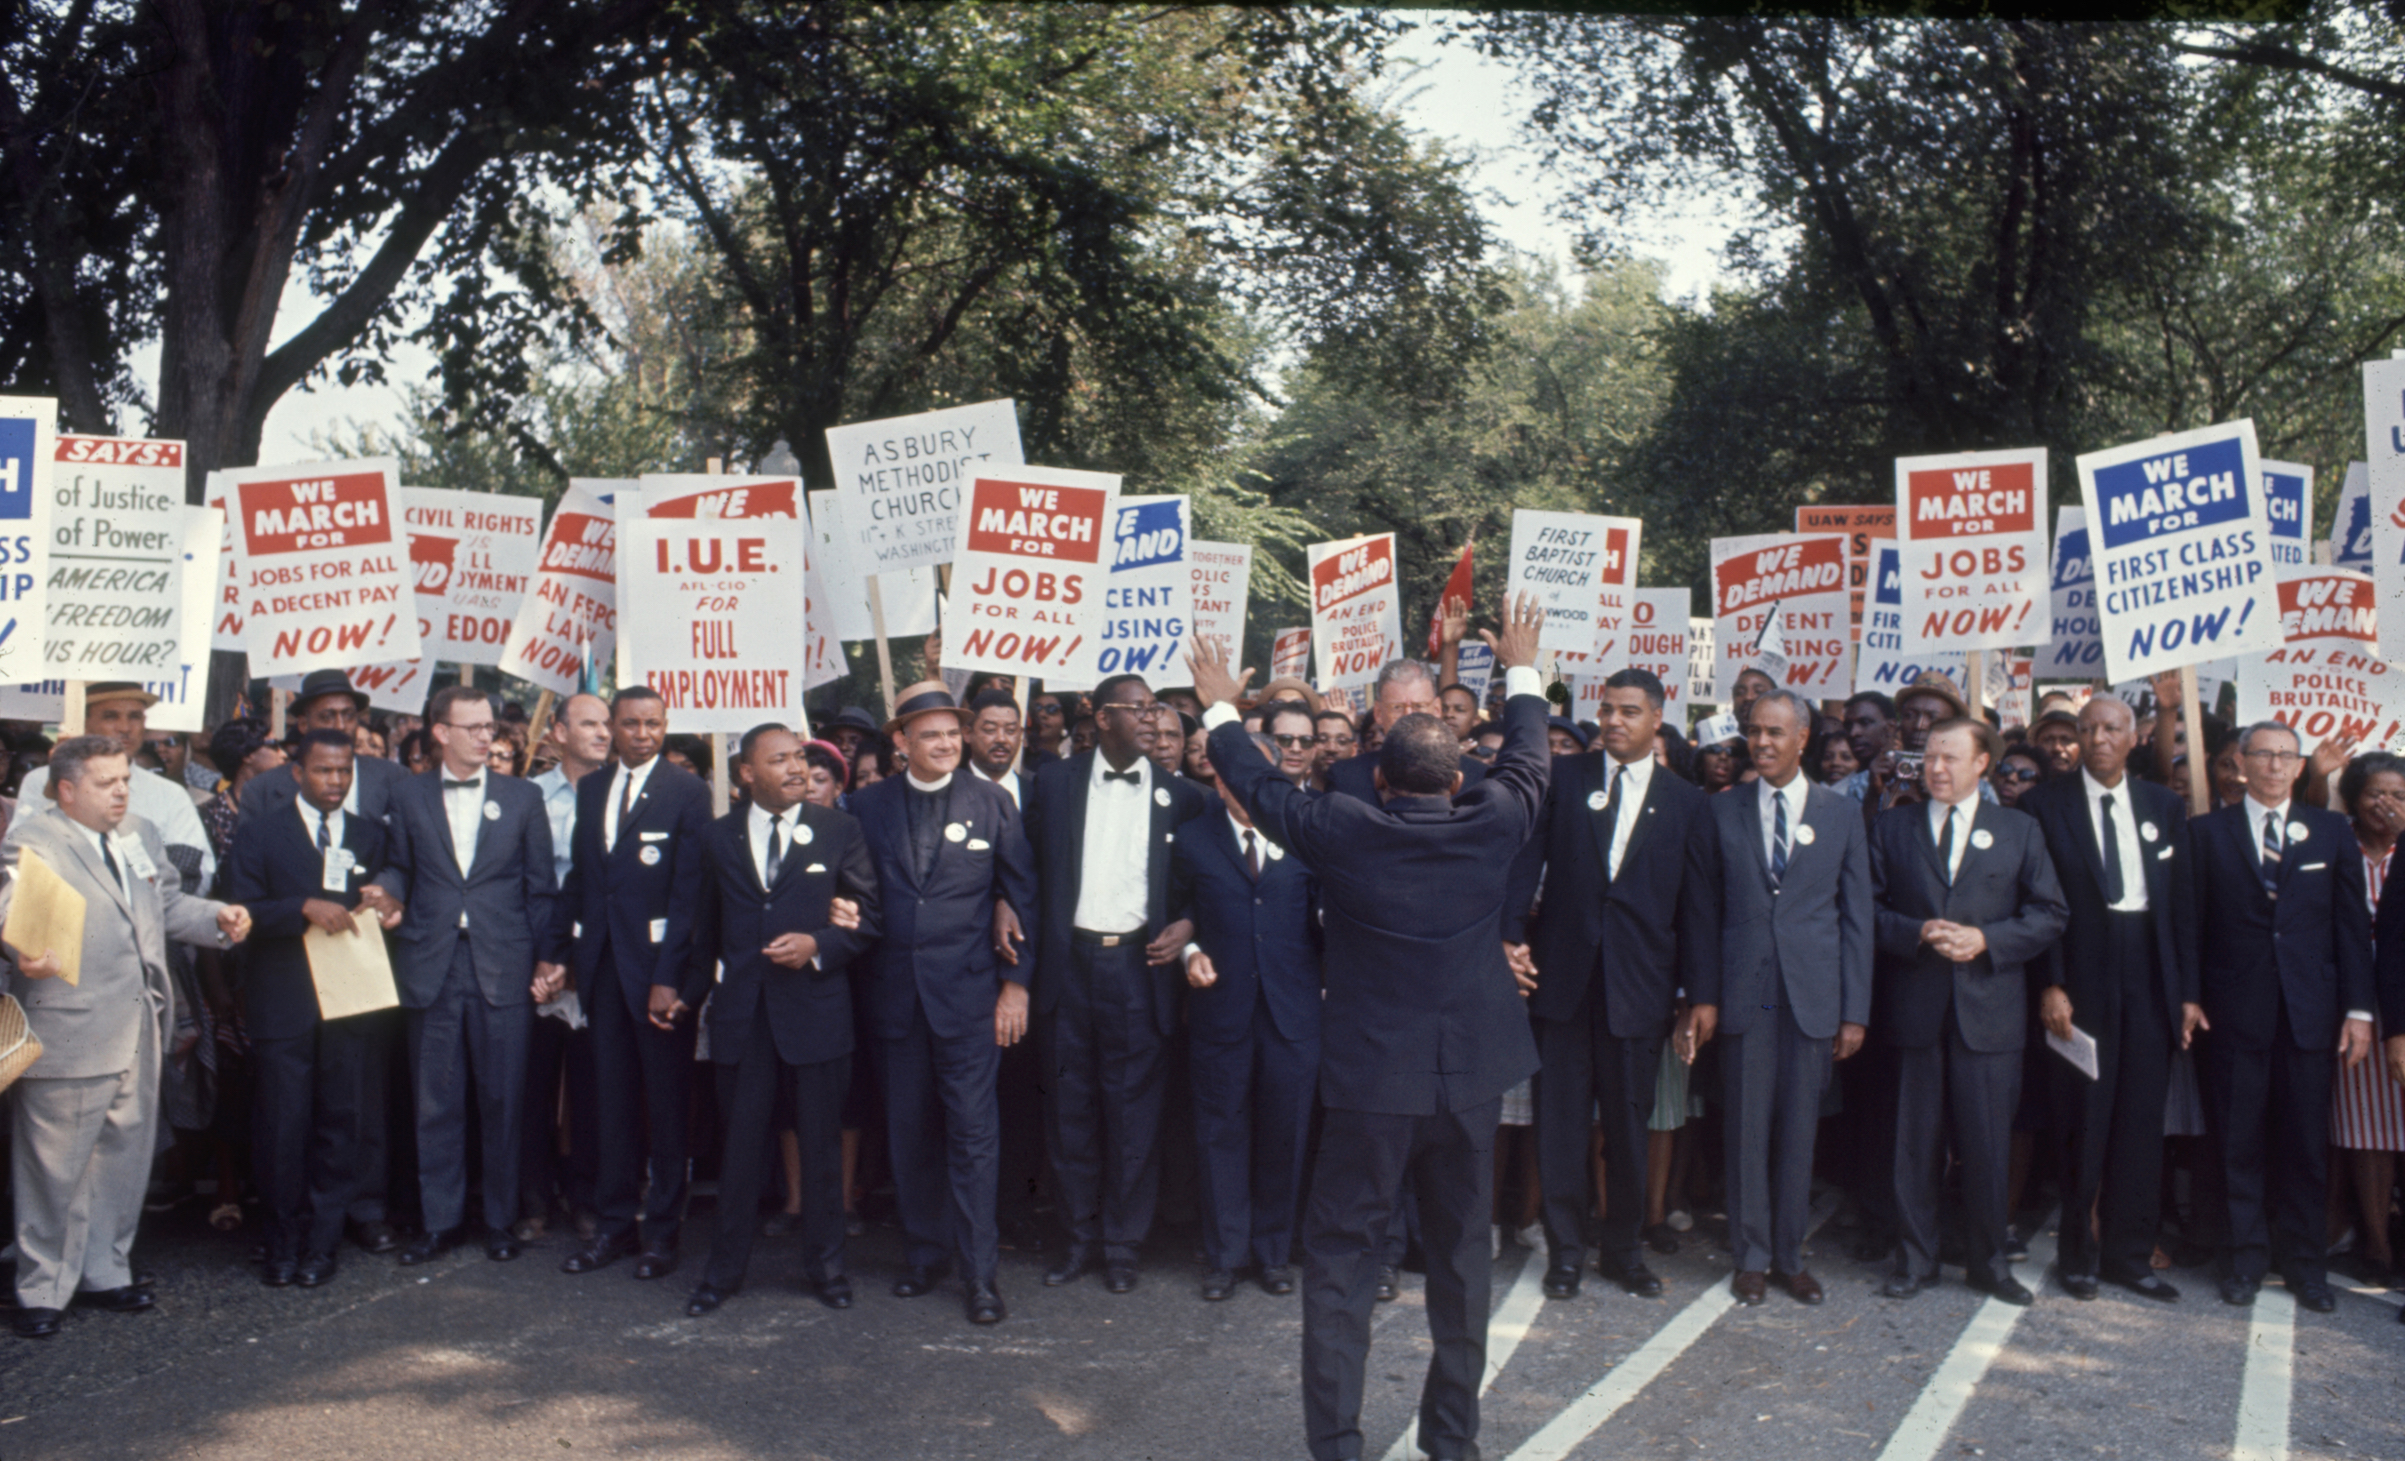 Civil Rights Activist preparing to demonstrate at the March on Washington on Aug. 28, 1963. Martin Luther King Jr. and John Lewis can both be seen on the right side of the frame. (Robert W. Kelley—The LIFE Picture Collection/Getty Images)